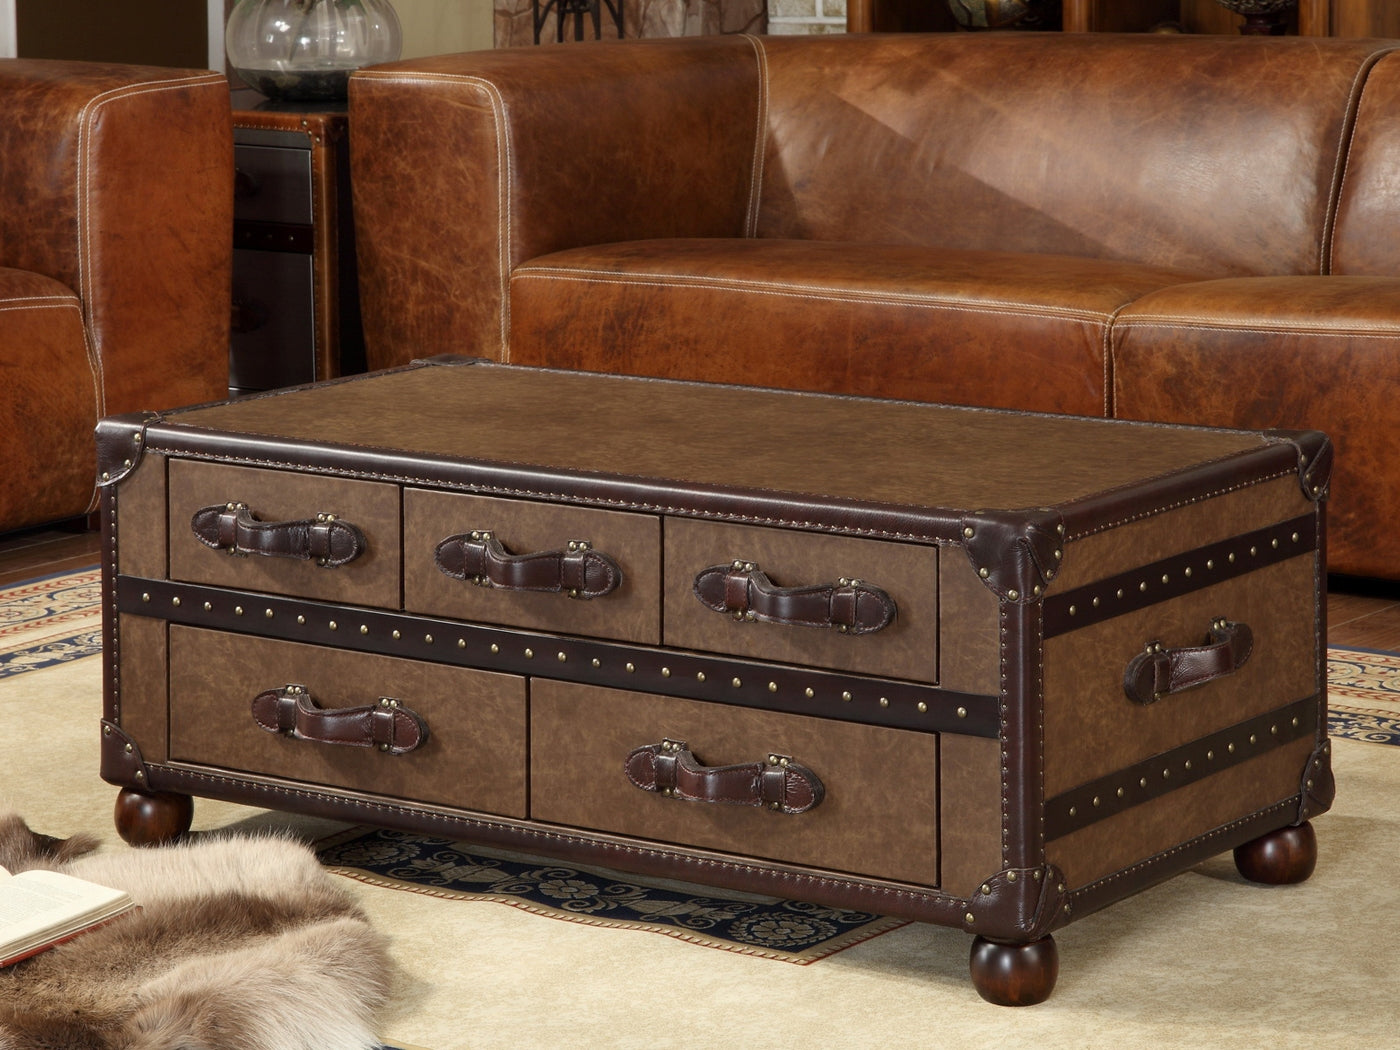 RIDSDENT LH057 - Storage trunk coffee table